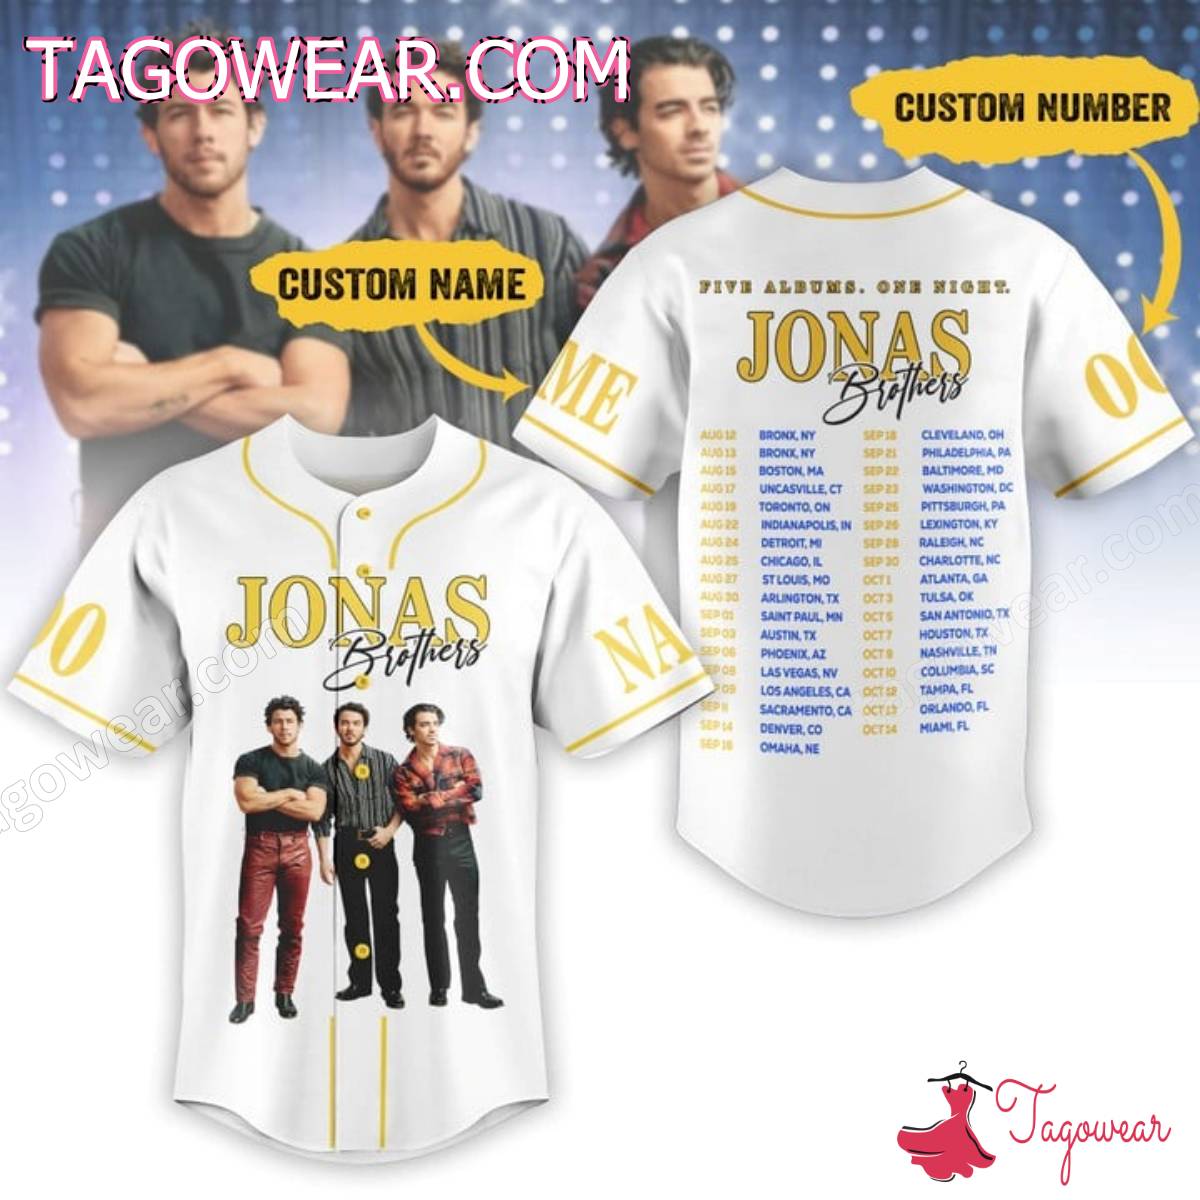 Jonas Brothers Five Albums One Night Tour Dates Personalized Baseball Jersey